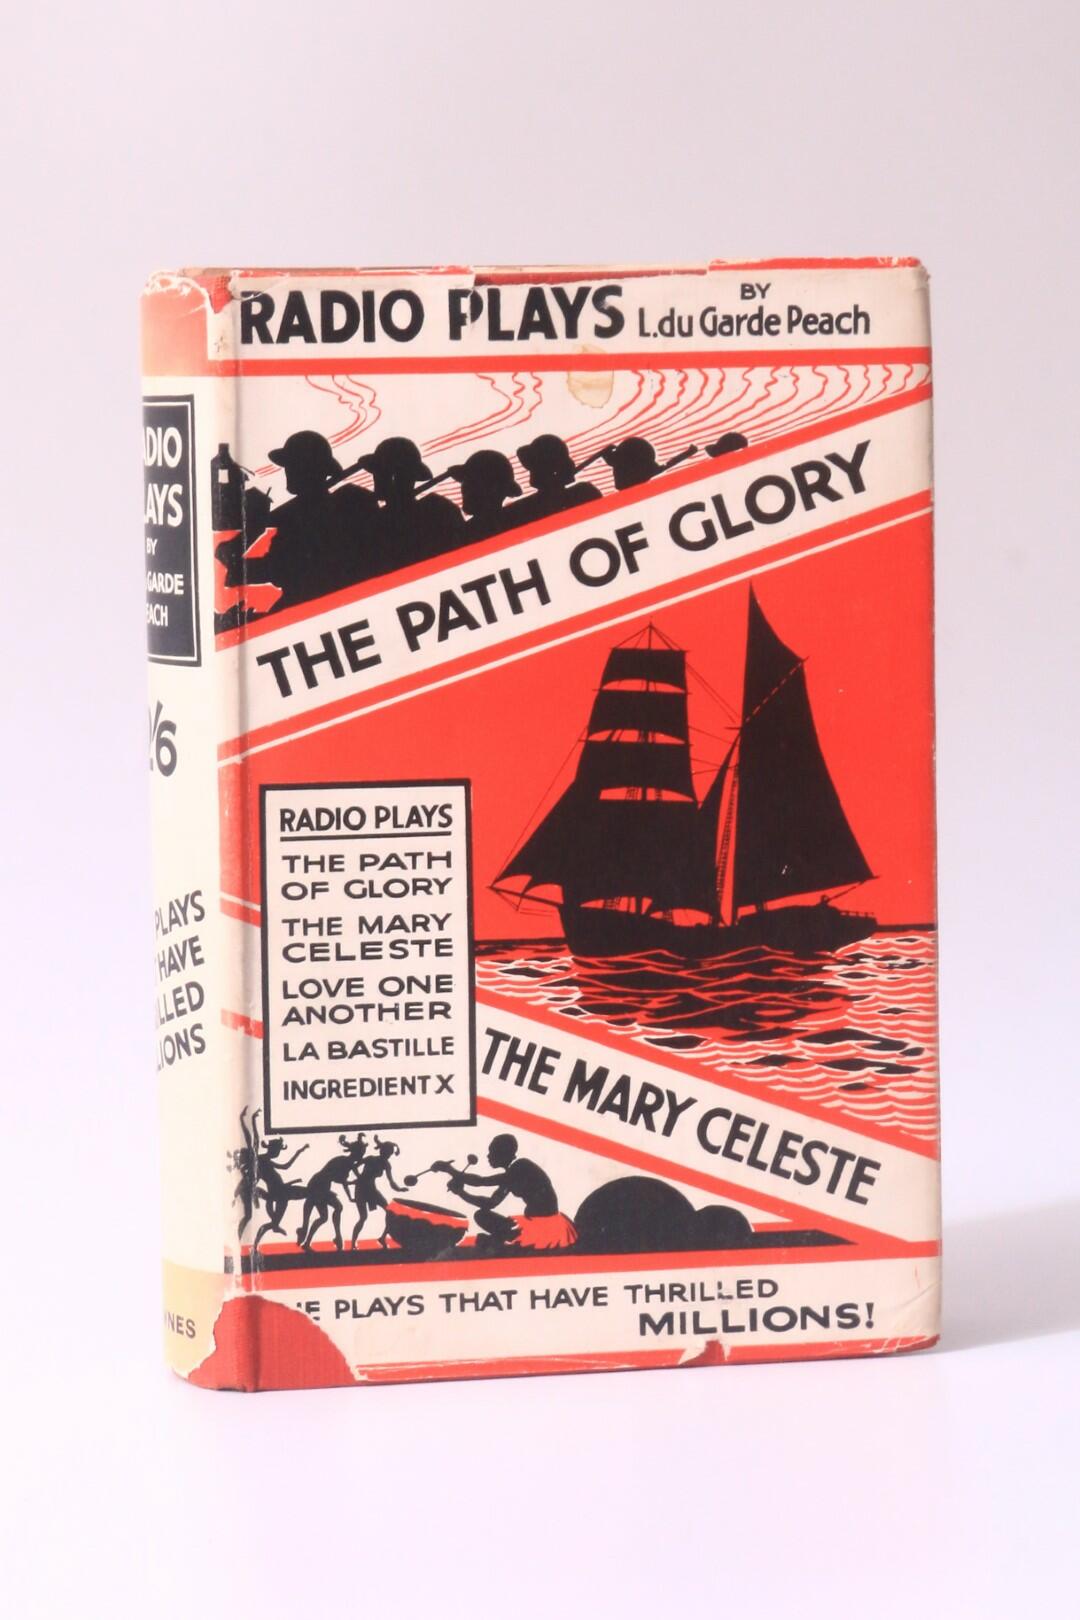 L. Du Garde Peach - Radio Plays: The Path of Glory, The Mary Celeste, Love One Another, La Bastille and Ingredient X - Newnes, nd [1932?], First Edition. Signed